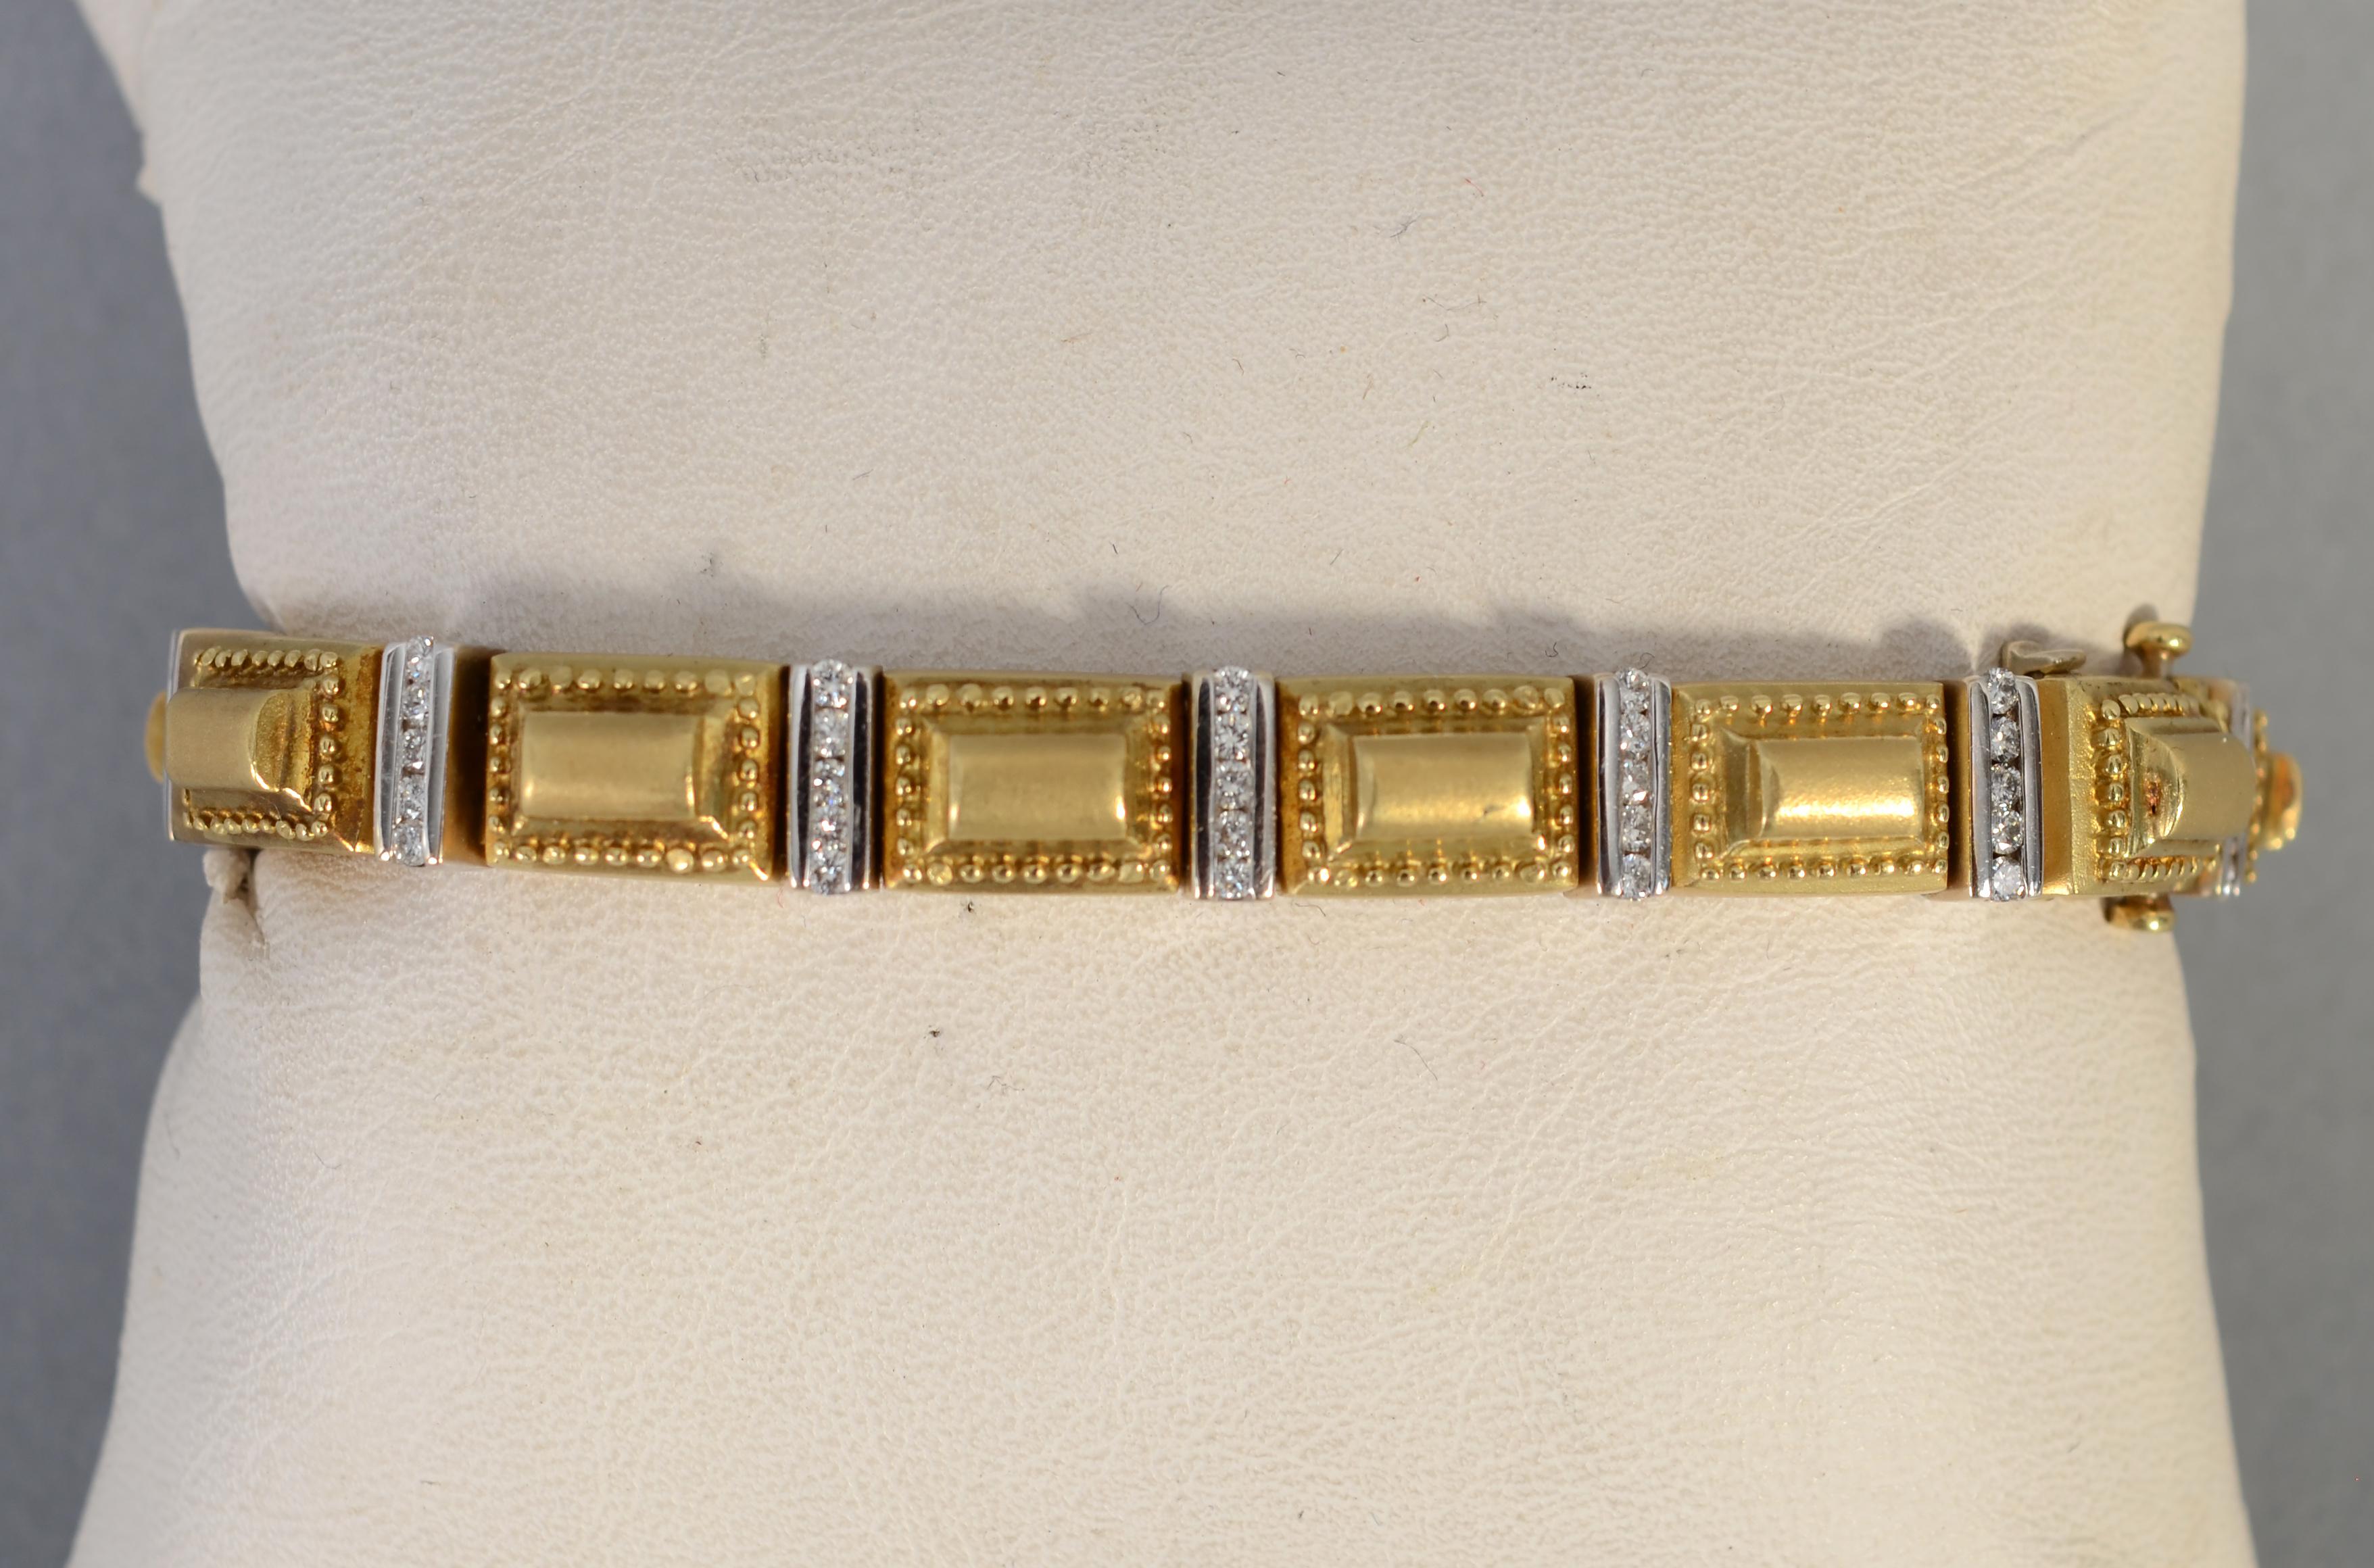 This gold bracelet by Seidengang is tailored yet has just the right touch of bling. Raised rectangular gold panels are framed with tiny gold dots. Between the rectangles are white gold links with five diamonds in each. The bracelet is 1/4 inch wide